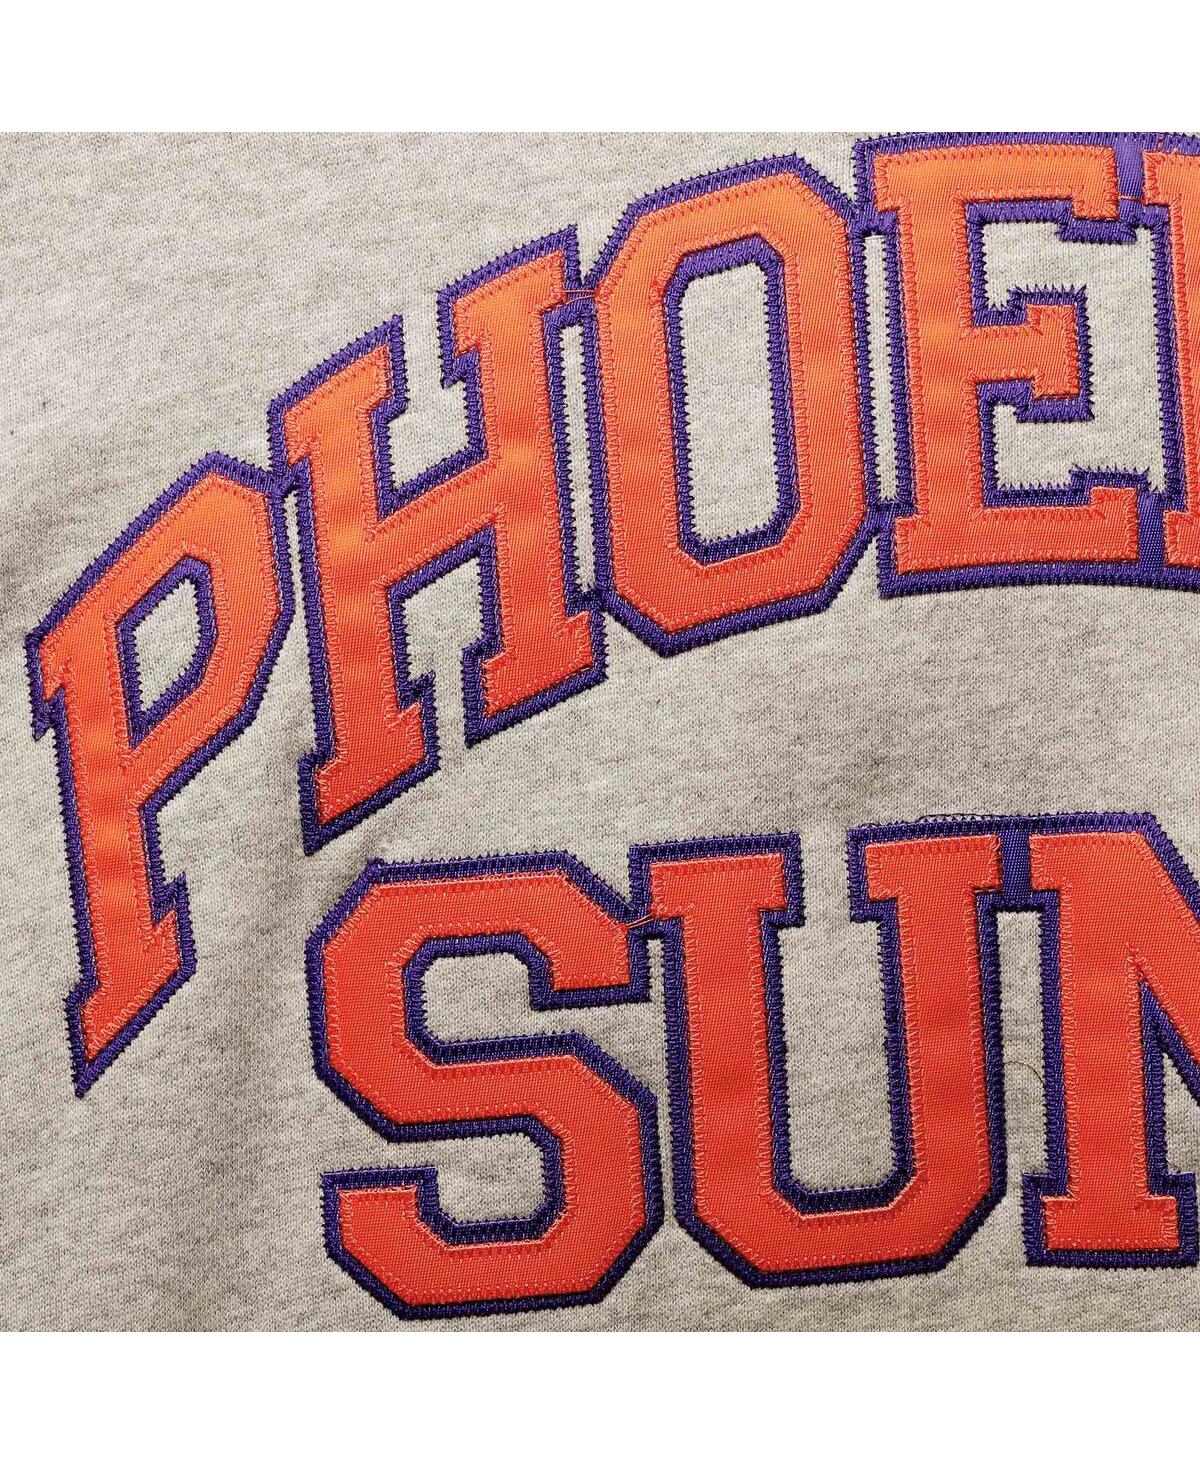 Shop Mitchell & Ness Men's  Steve Nash Heathered Gray Phoenix Suns Big And Tall Name And Number Pullover H